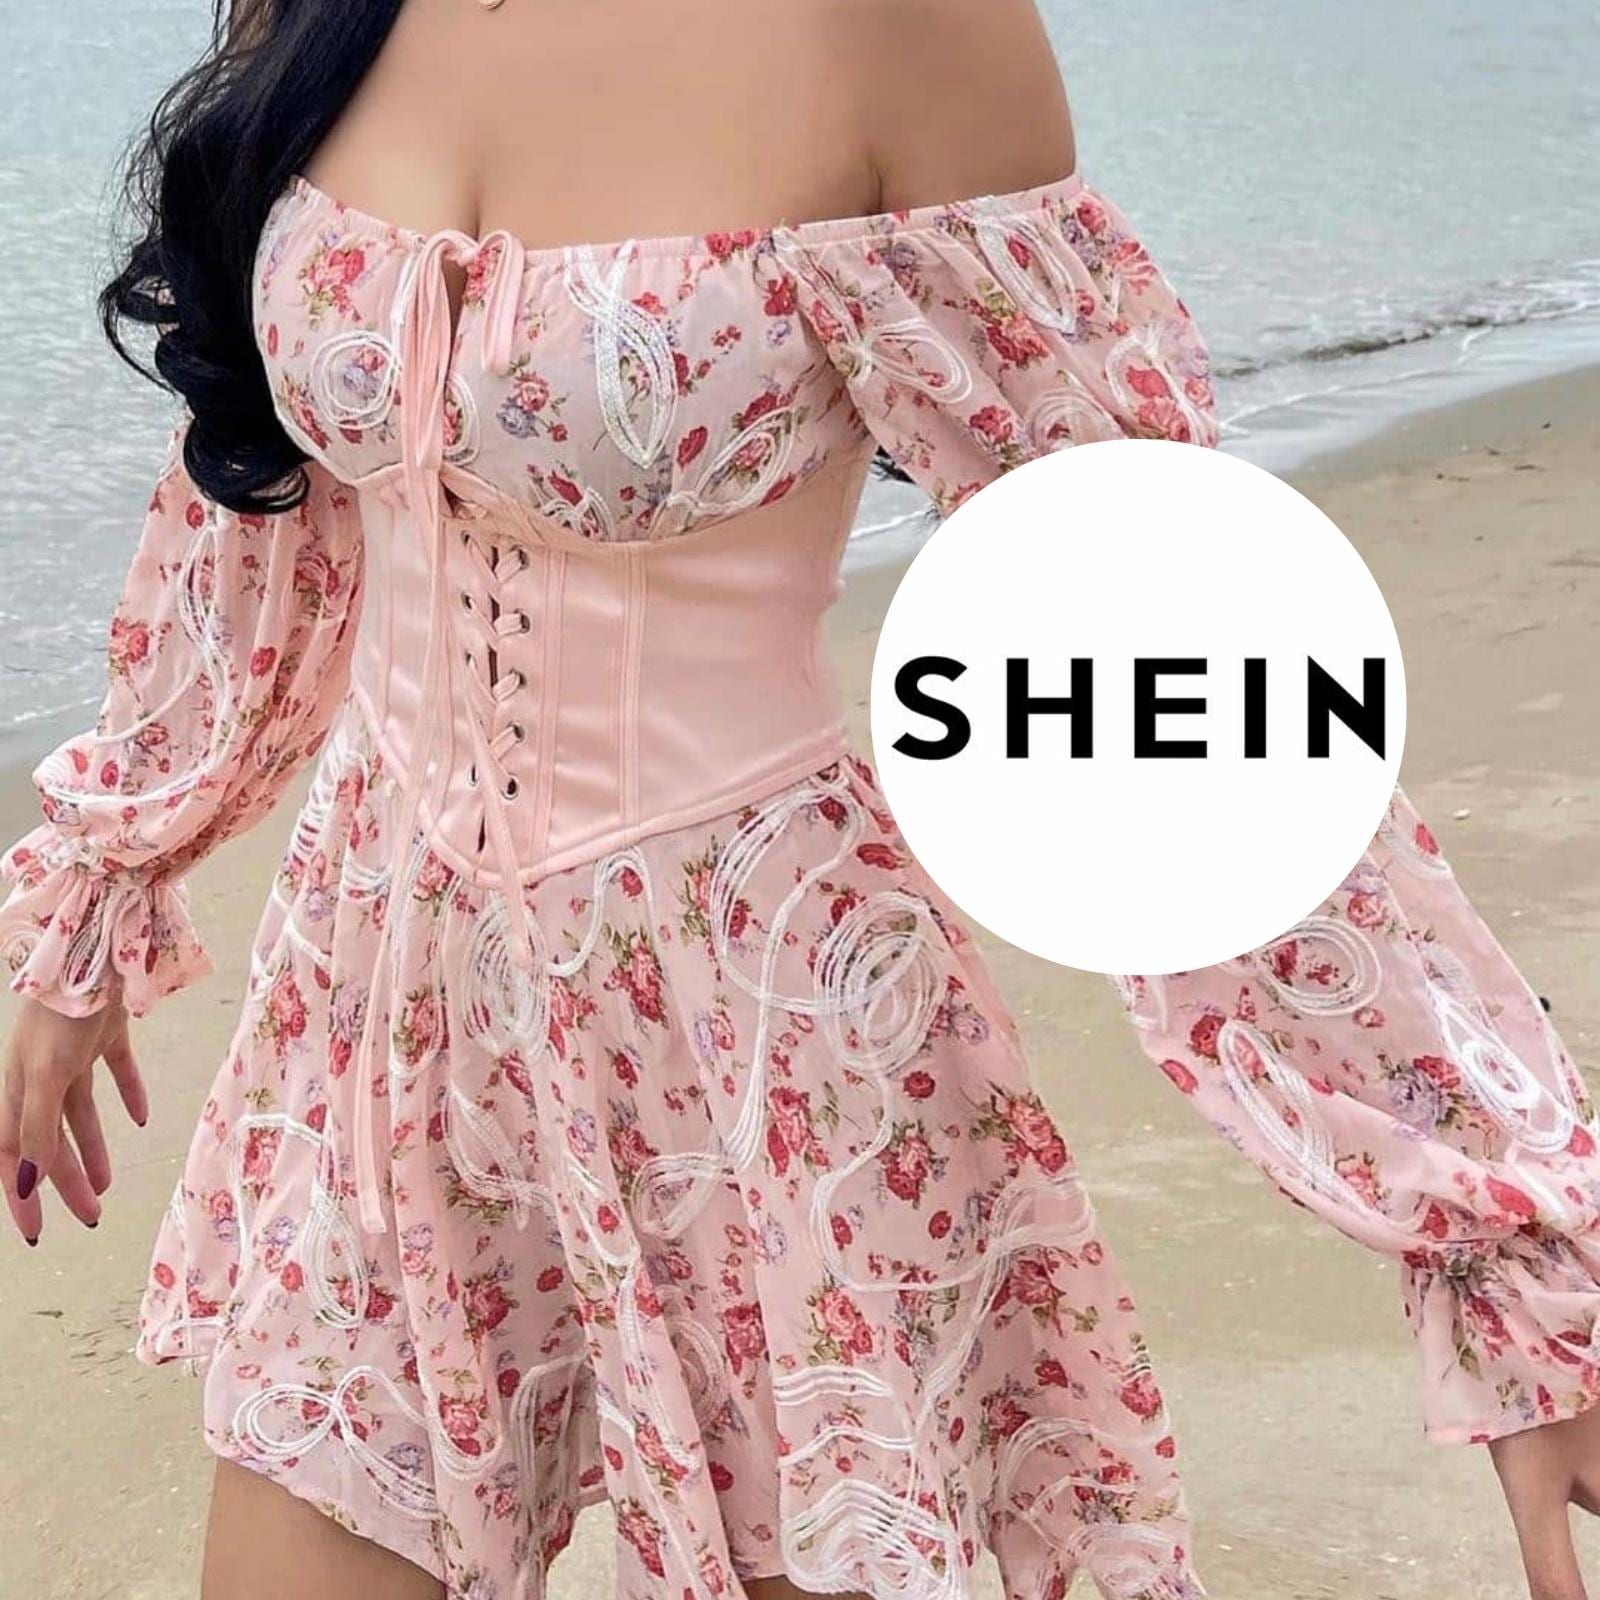 Shein is Back in India. But is the Clothing Giant Good for the Environment?  - News18